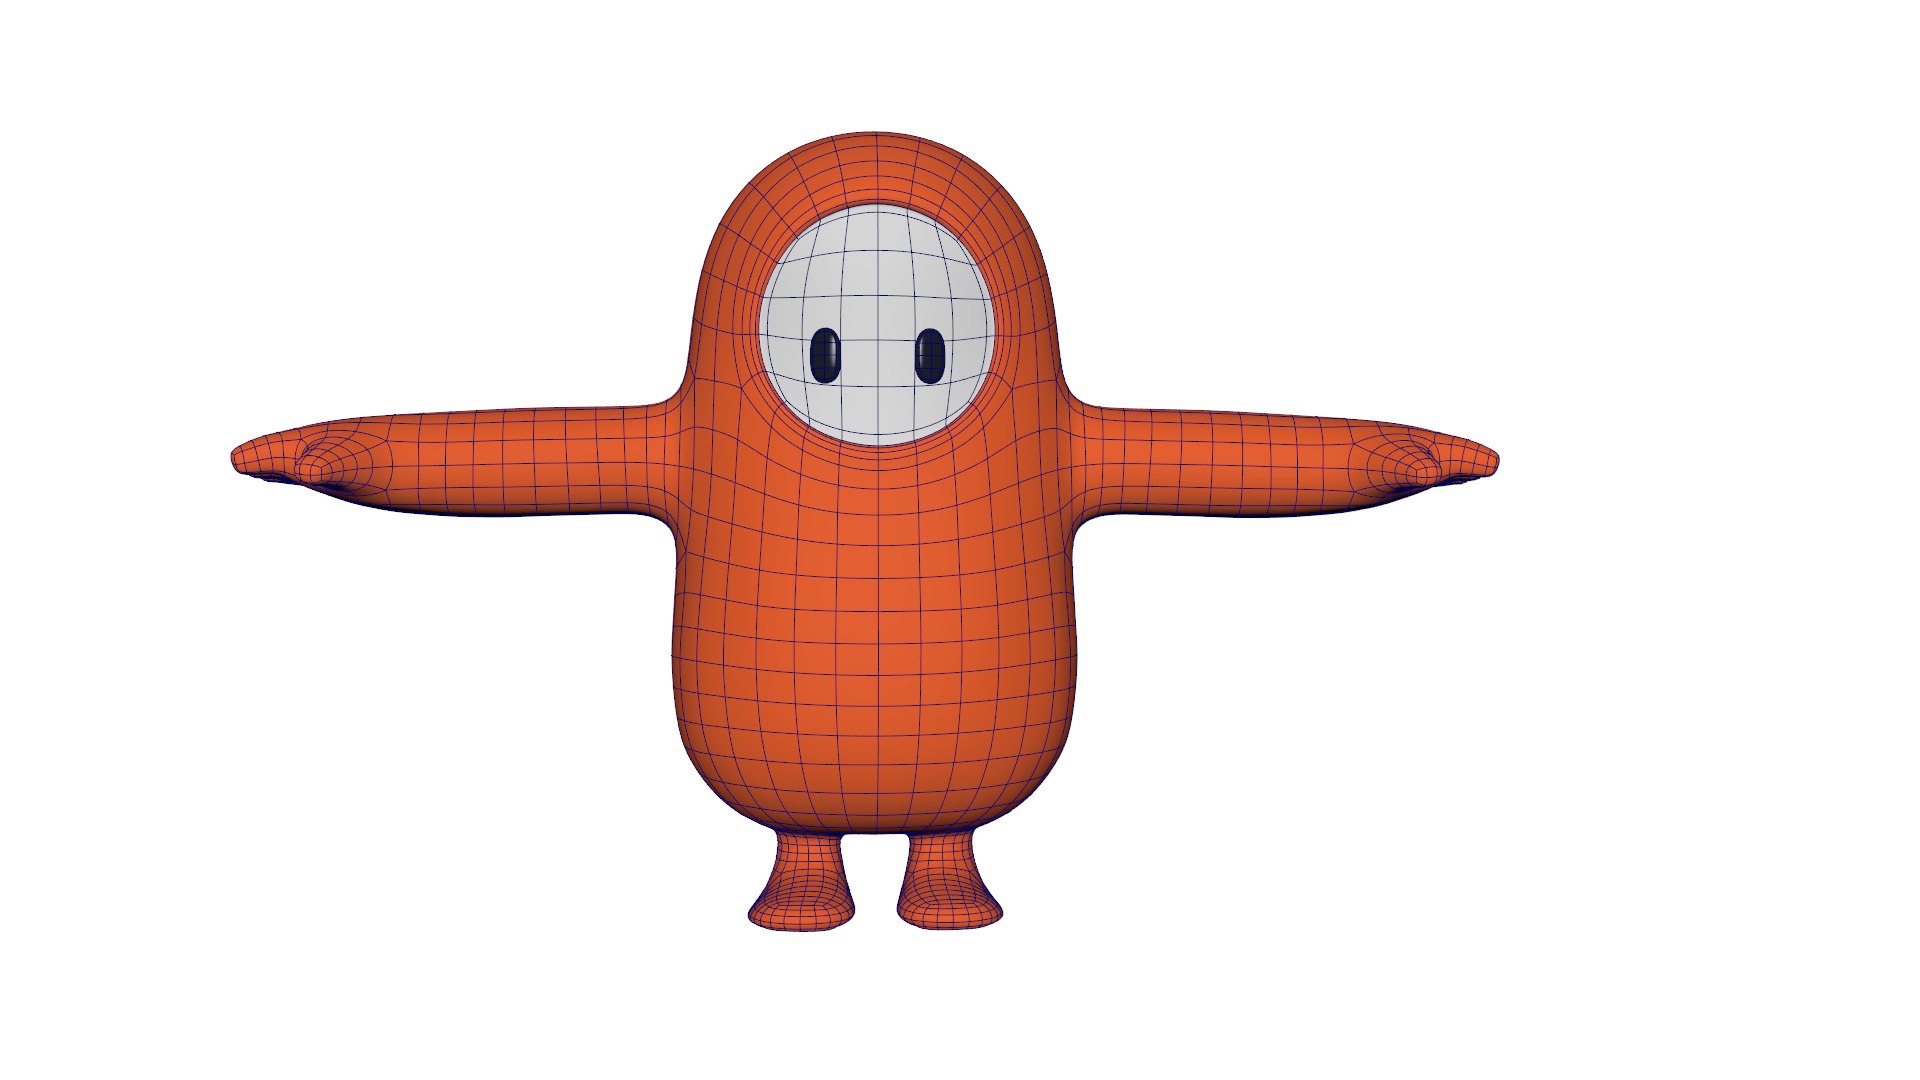 Free 3D Fall guy rigged model - TurboSquid 1961058